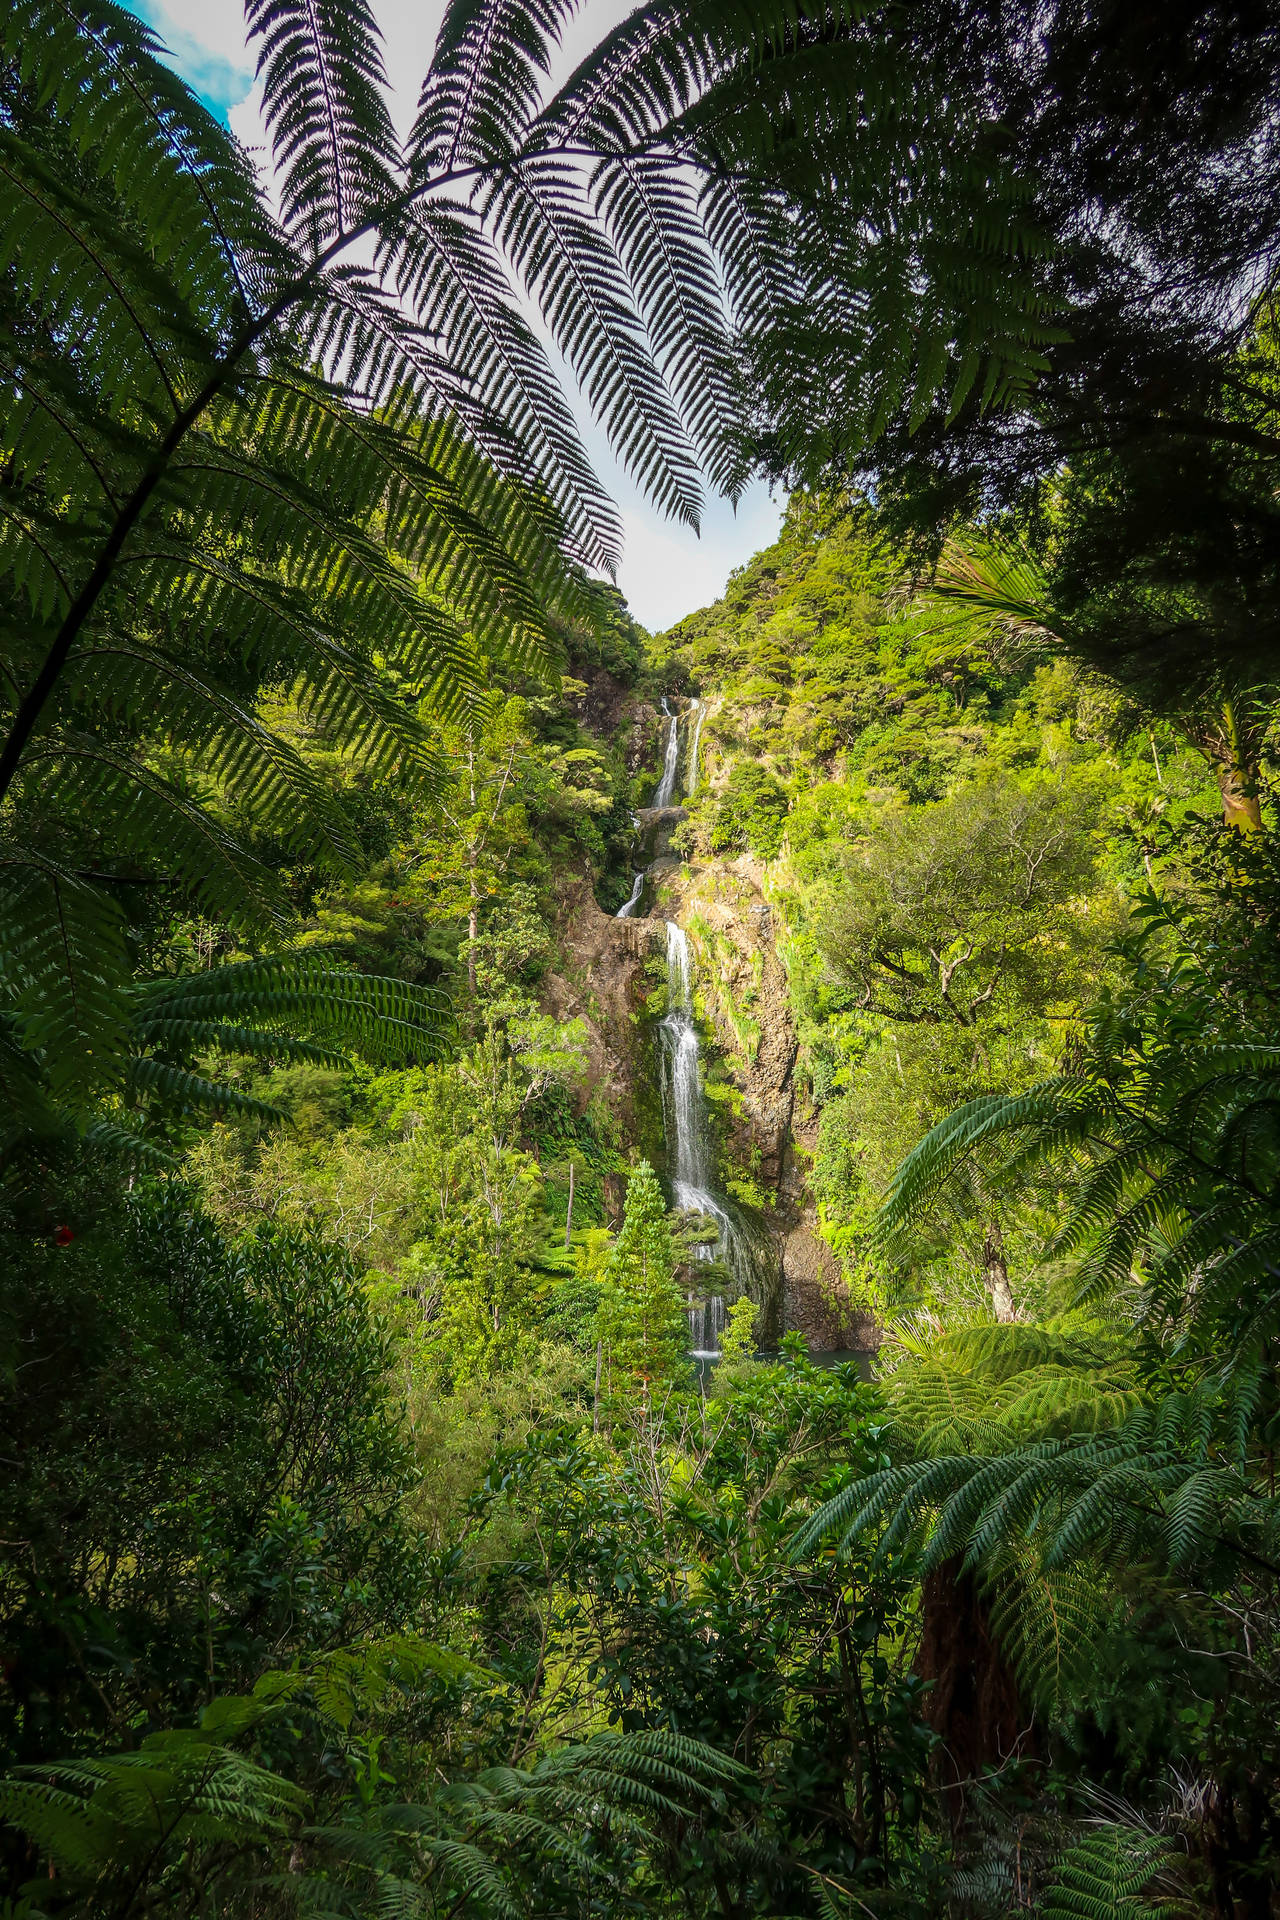 A breathtaking view of a remote waterfalls in a lush jungle Wallpaper